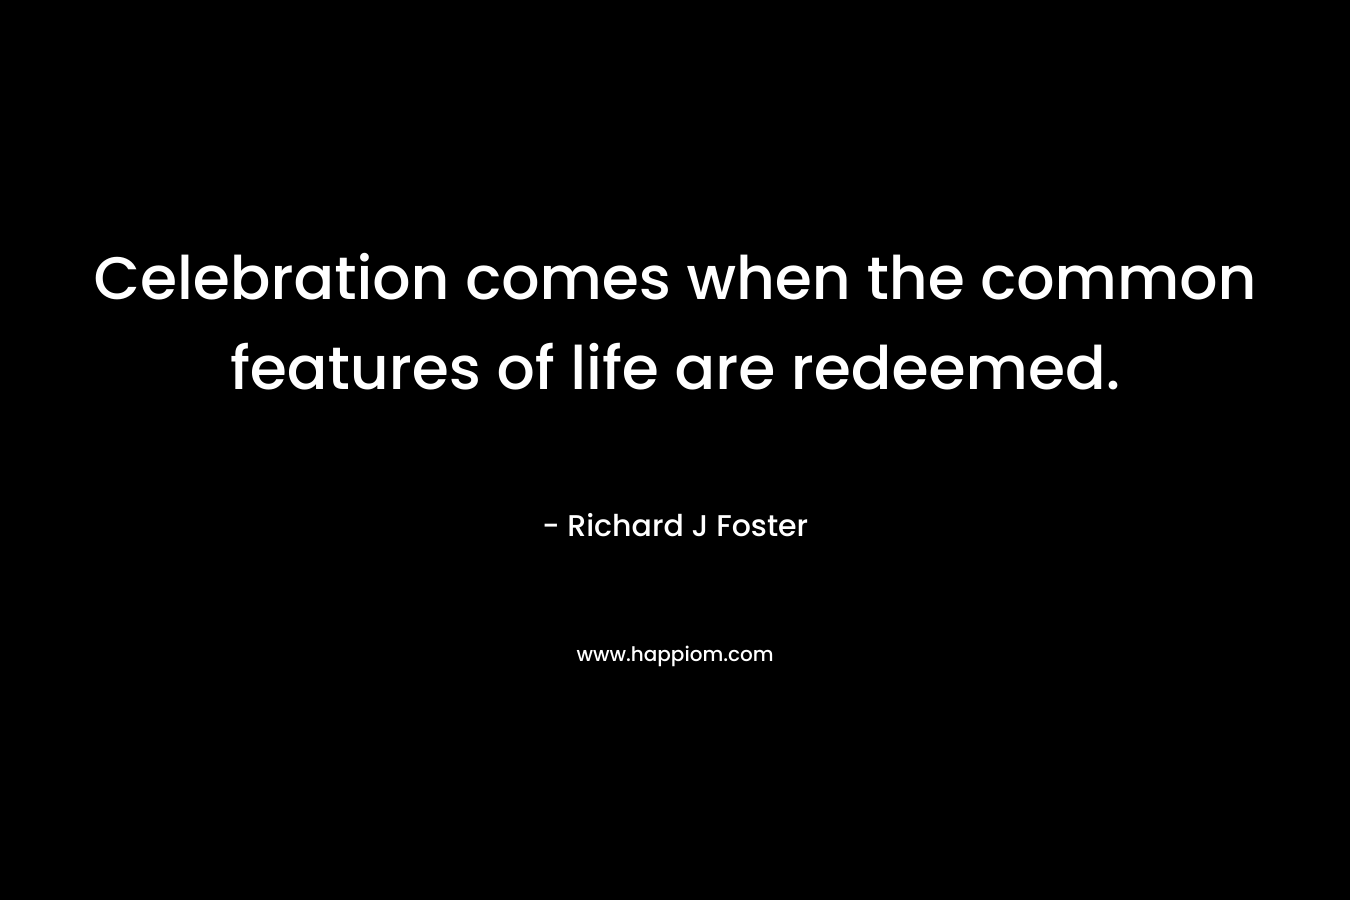 Celebration comes when the common features of life are redeemed. – Richard J Foster